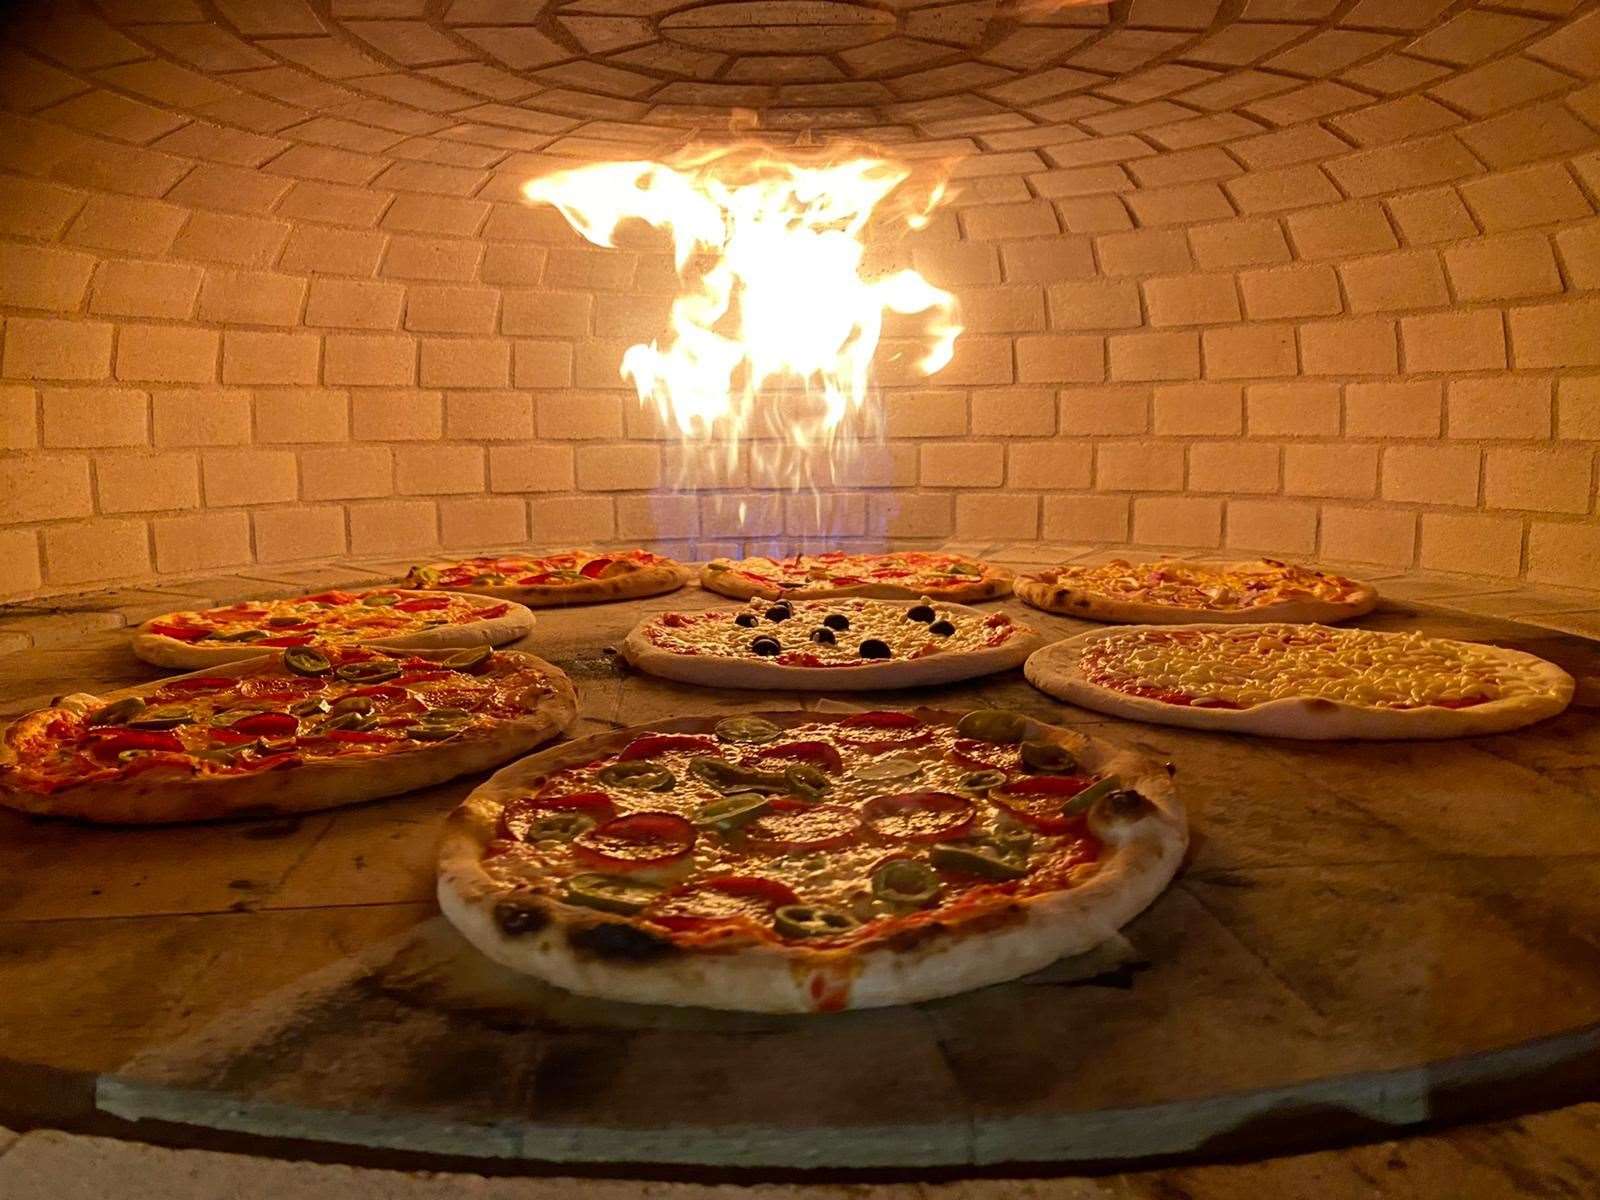 Fireaway Pizza, which can cook pizzas in 180 seconds, has revealed plans to open in Sheerness